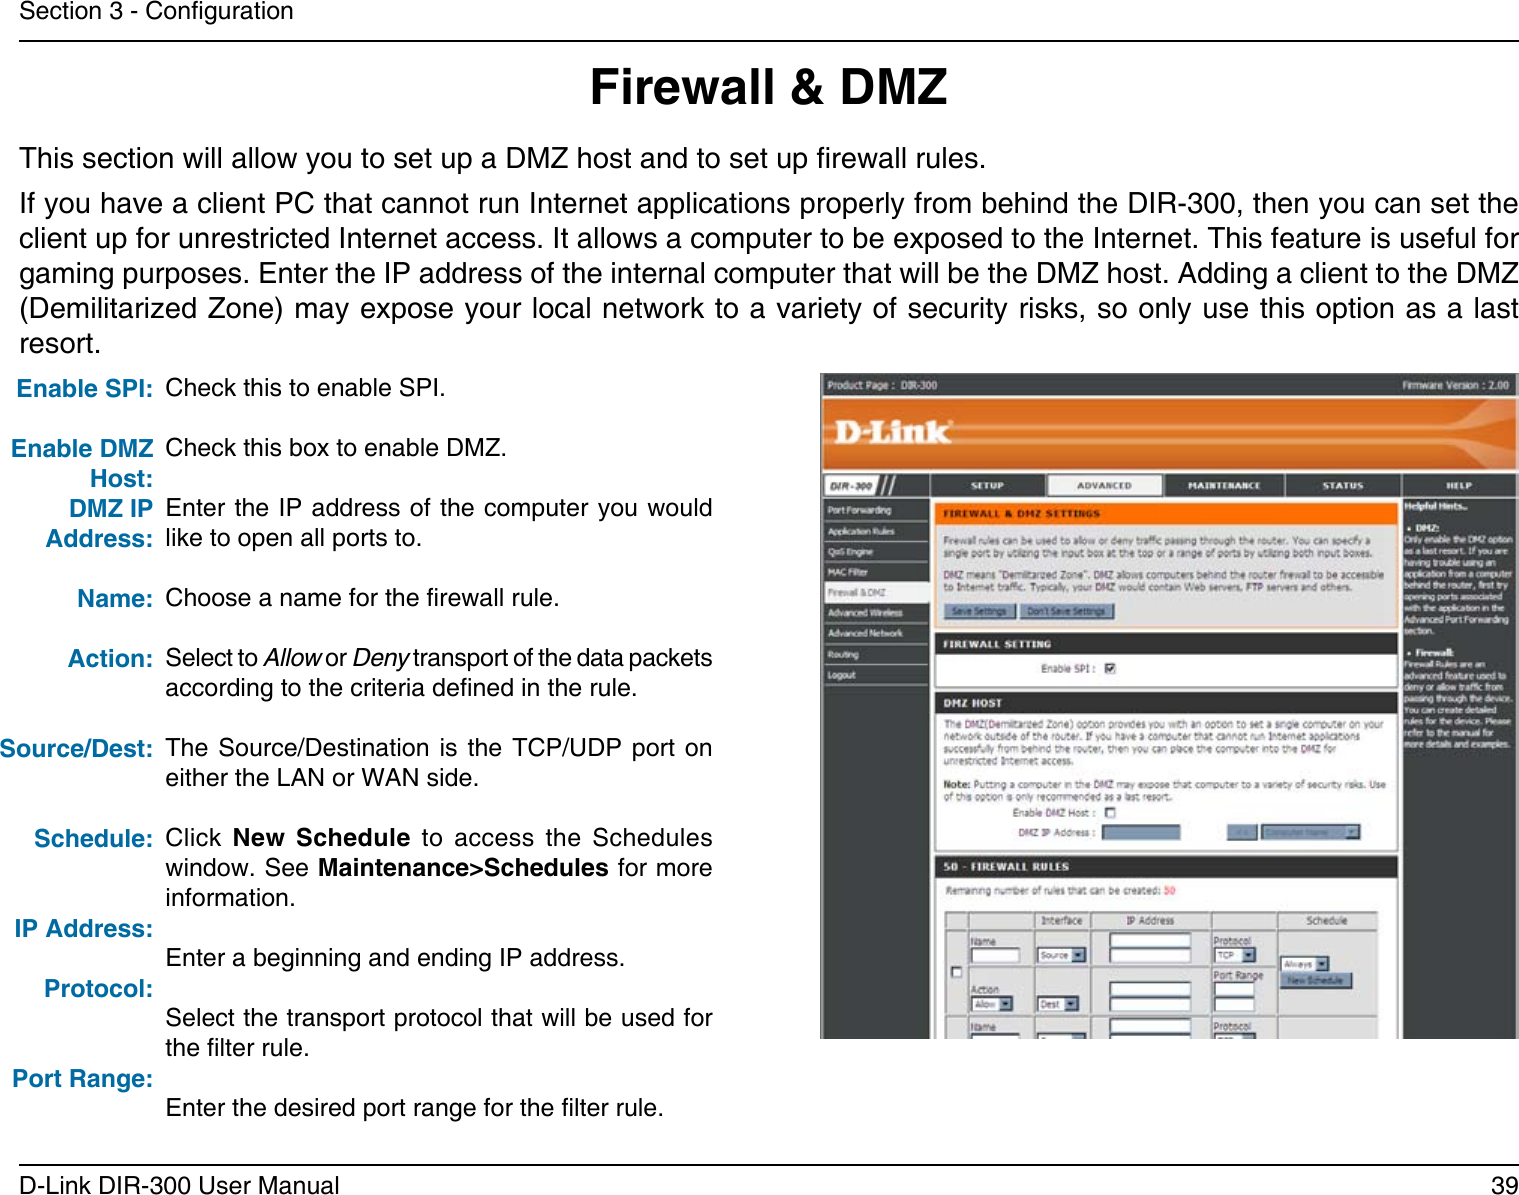 39D-Link DIR-300 User ManualSection 3 - CongurationFirewall &amp; DMZThis section will allow you to set up a DMZ host and to set up rewall rules.If you have a client PC that cannot run Internet applications properly from behind the DIR-300, then you can set the client up for unrestricted Internet access. It allows a computer to be exposed to the Internet. This feature is useful for gaming purposes. Enter the IP address of the internal computer that will be the DMZ host. Adding a client to the DMZ (Demilitarized Zone) may expose your local network to a variety of security risks, so only use this option as a last resort.Check this to enable SPI.Check this box to enable DMZ.Enter the IP address of the computer you would like to open all ports to.Choose a name for the rewall rule.Select to Allow or Deny transport of the data packets according to the criteria dened in the rule. The Source/Destination  is the  TCP/UDP  port on either the LAN or WAN side.Click  New  Schedule  to  access  the  Schedules window. See Maintenance&gt;Schedules for more information.Enter a beginning and ending IP address.Select the transport protocol that will be used for the lter rule.Enter the desired port range for the lter rule.Enable DMZ Host:DMZ IP Address:Name:Action:Source/Dest:Schedule:IP Address:Protocol:Port Range: Enable SPI:   